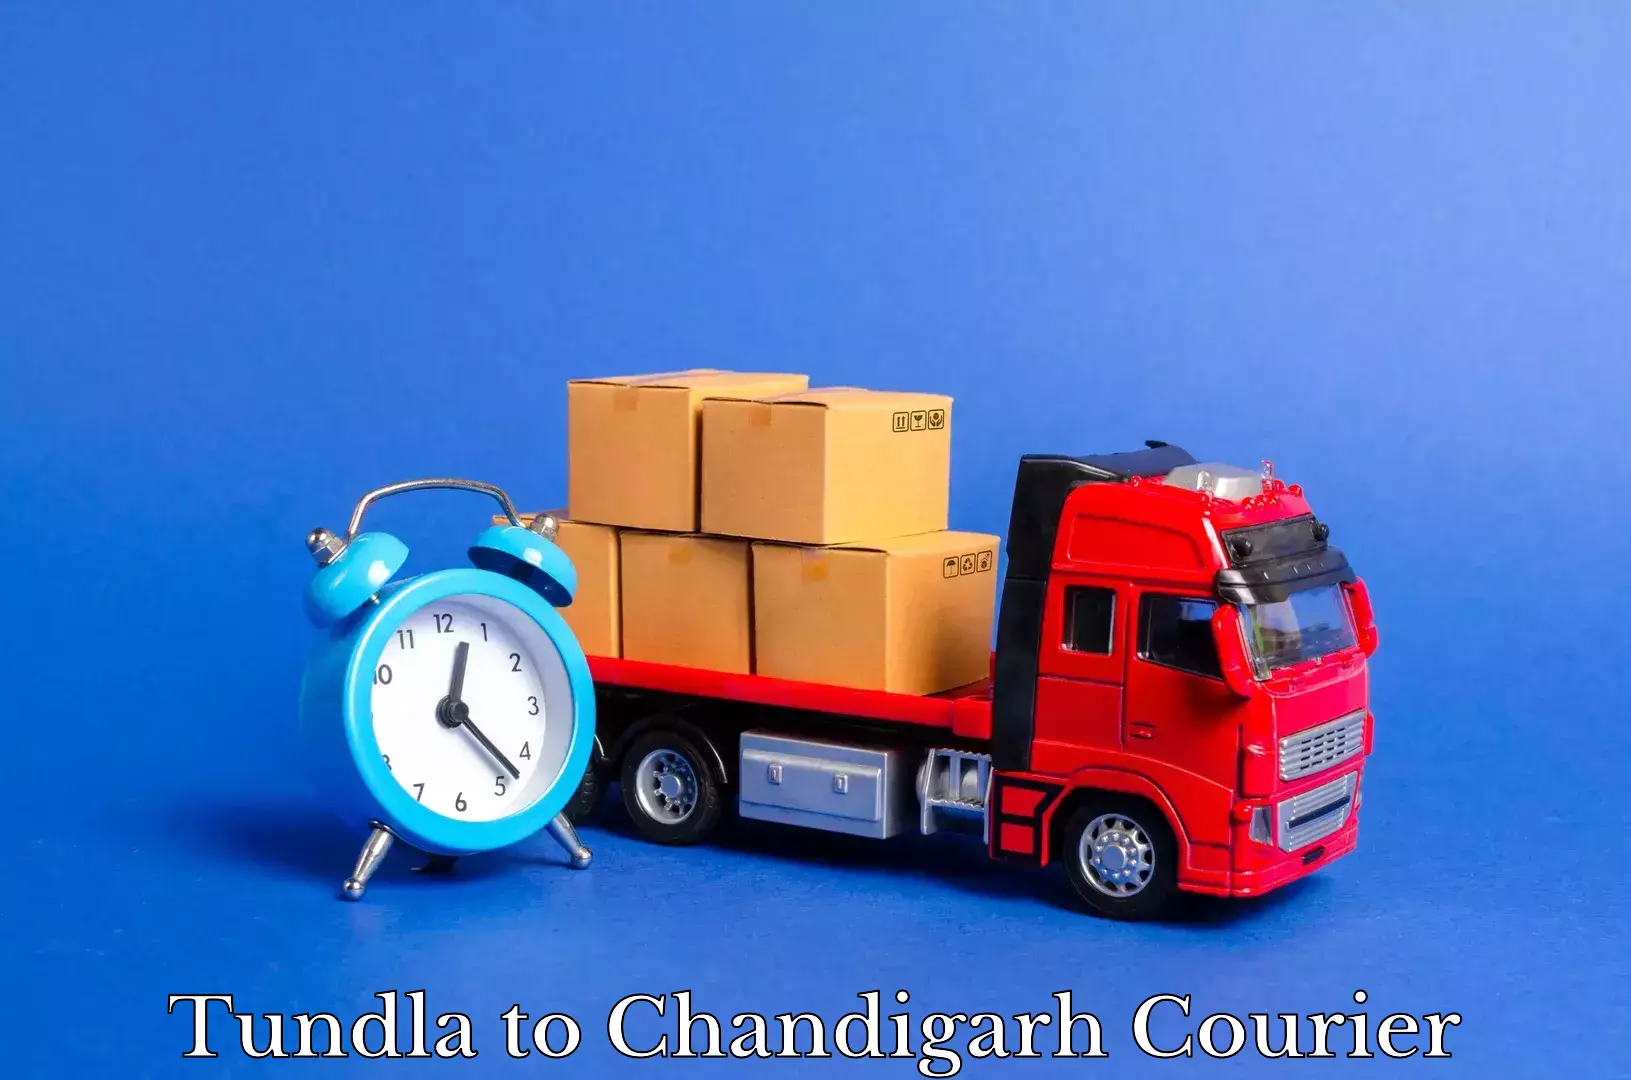 Furniture moving specialists Tundla to Chandigarh